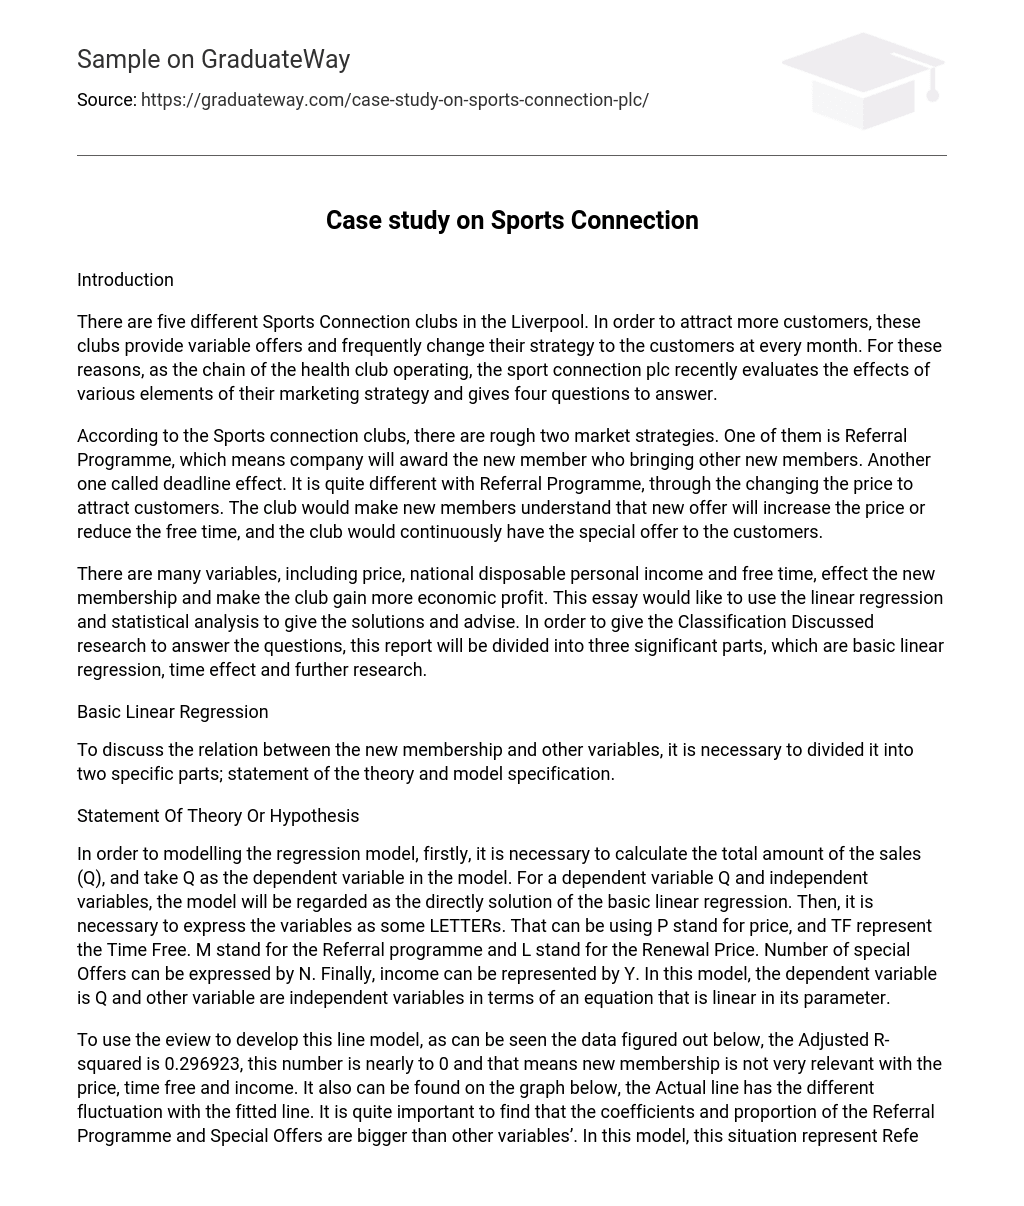 Case study on Sports Connection